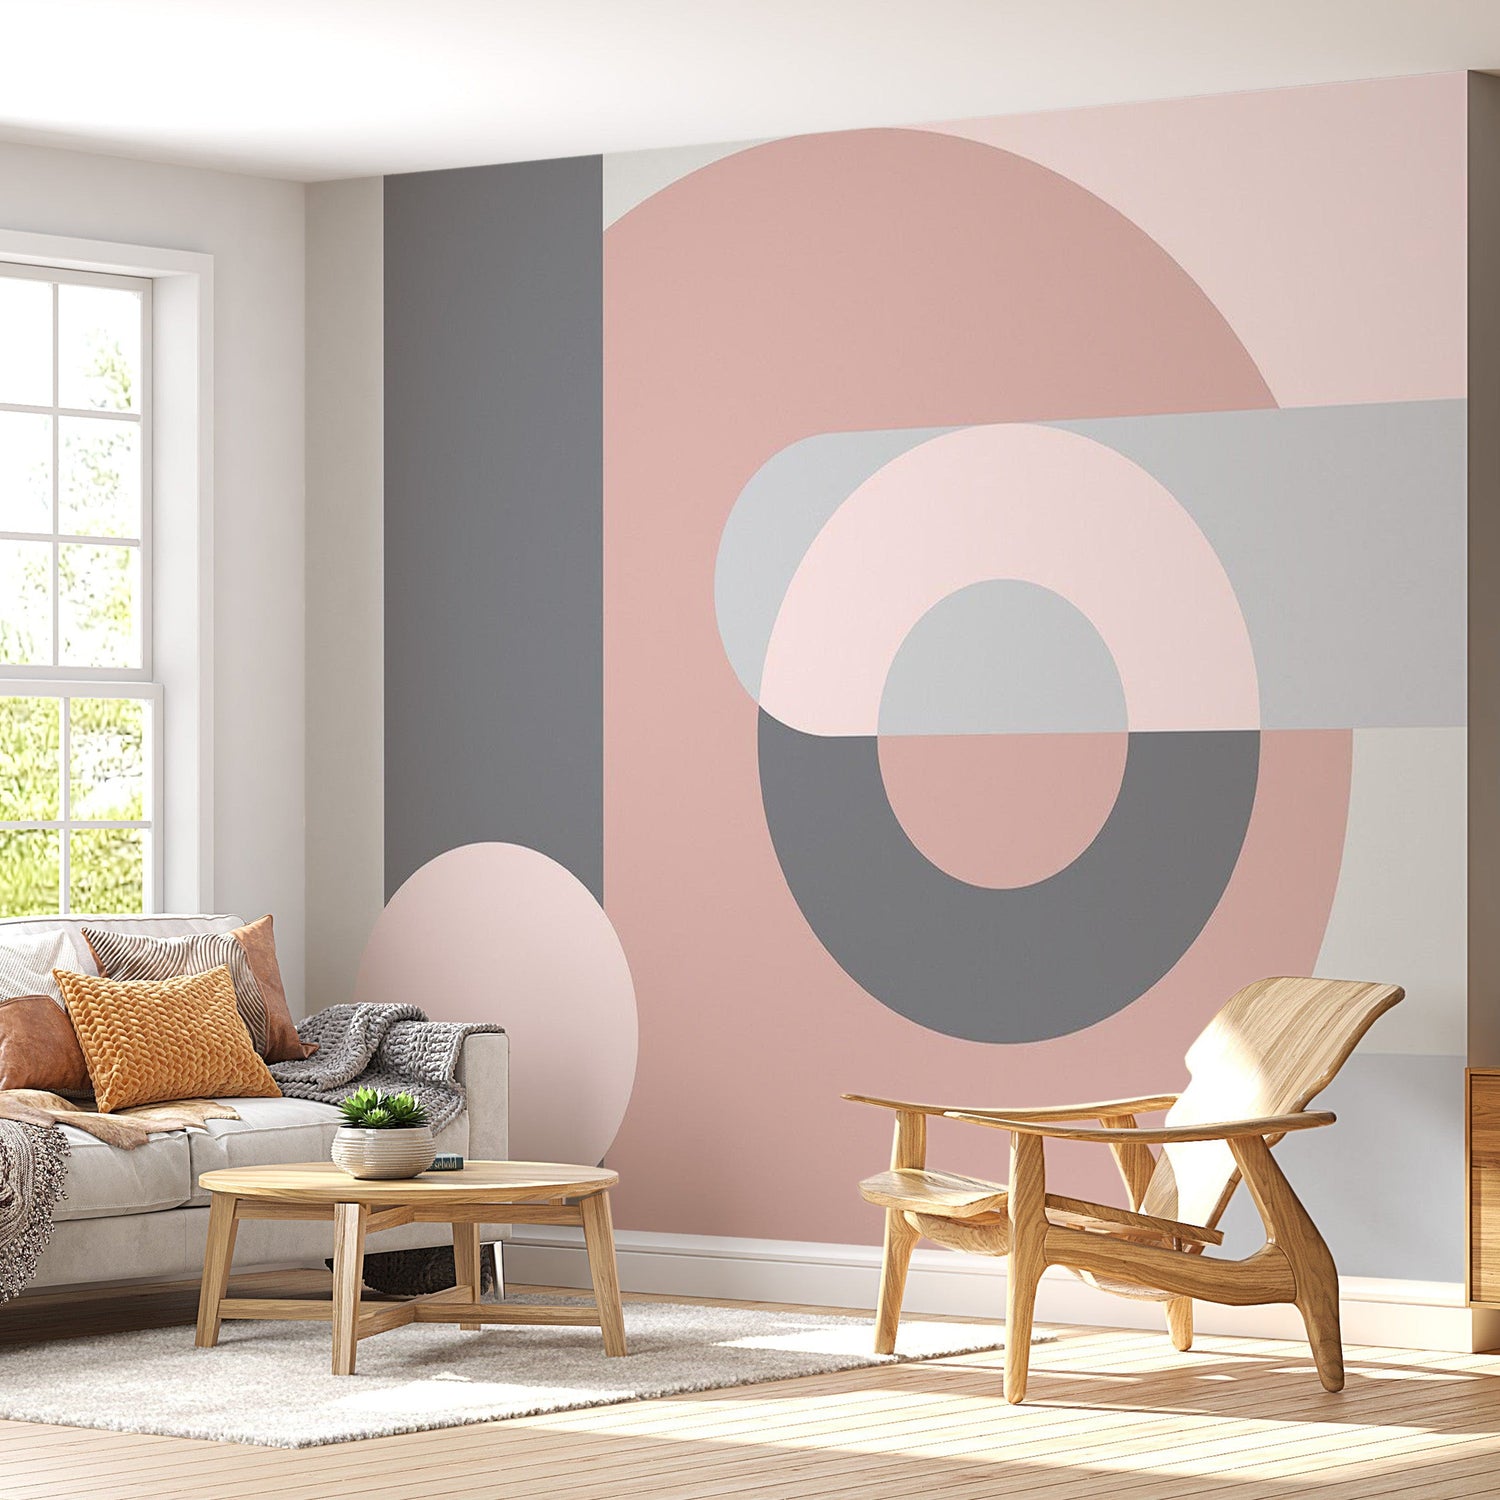 Peel & Stick Wall Mural - Geometric Abstract Design Pink - Removable Wall Decals